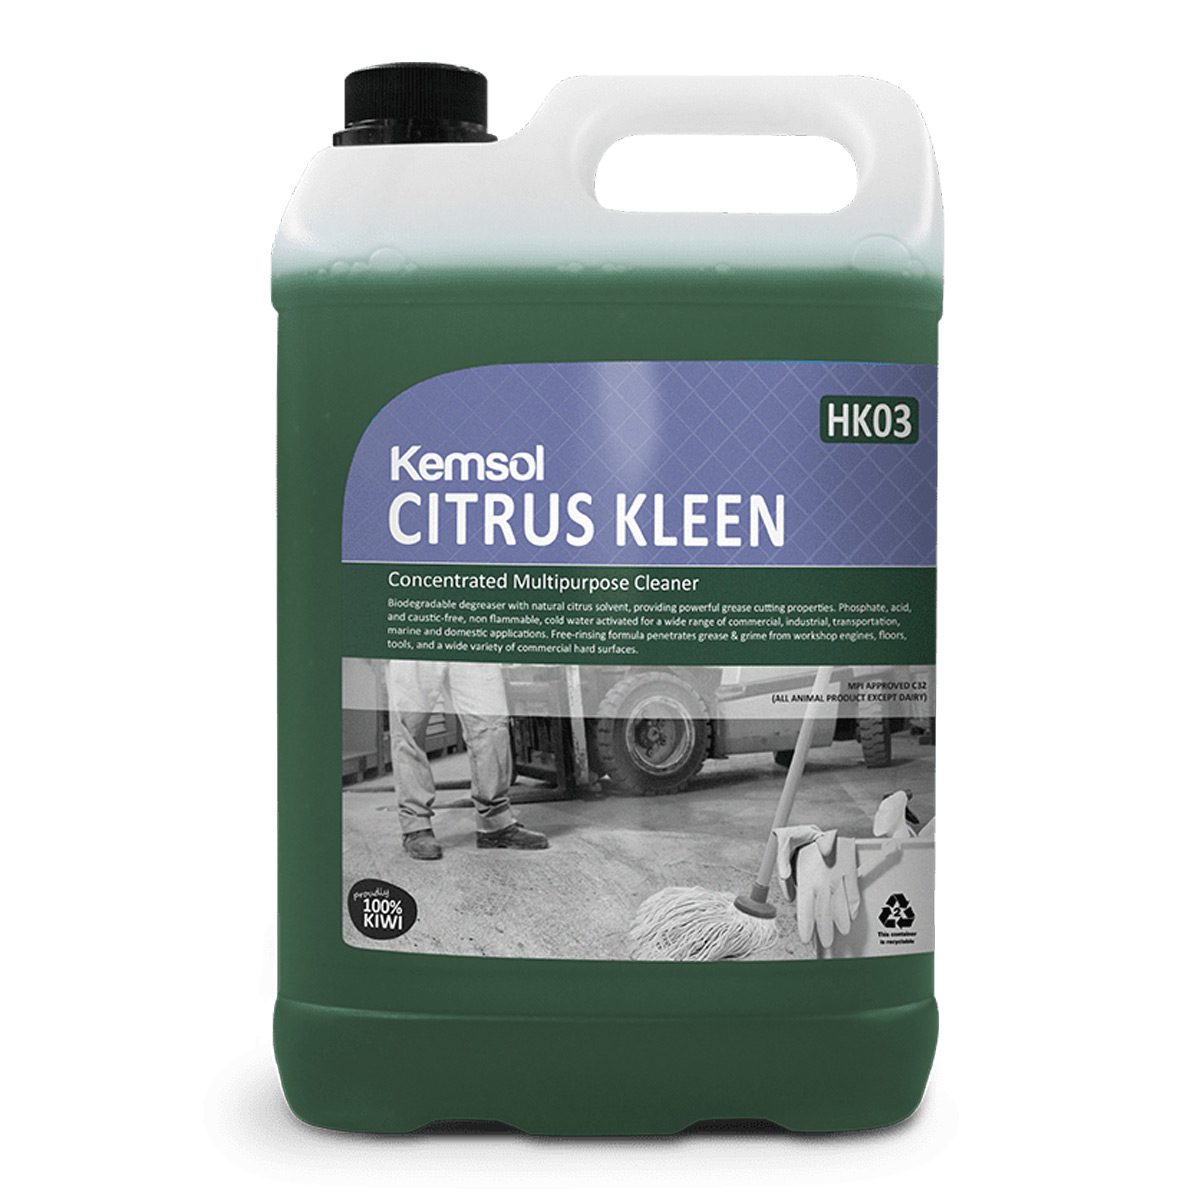 cleaning-products-kitchen-multipurpose-kemsol-citrus -kleen-5L-biodegradable-degreaser-grease-cutting-properties-phosphate-acid-caustic-free-non-flammable-cold-water-activated-vjs-distributors-KCKLEESKU